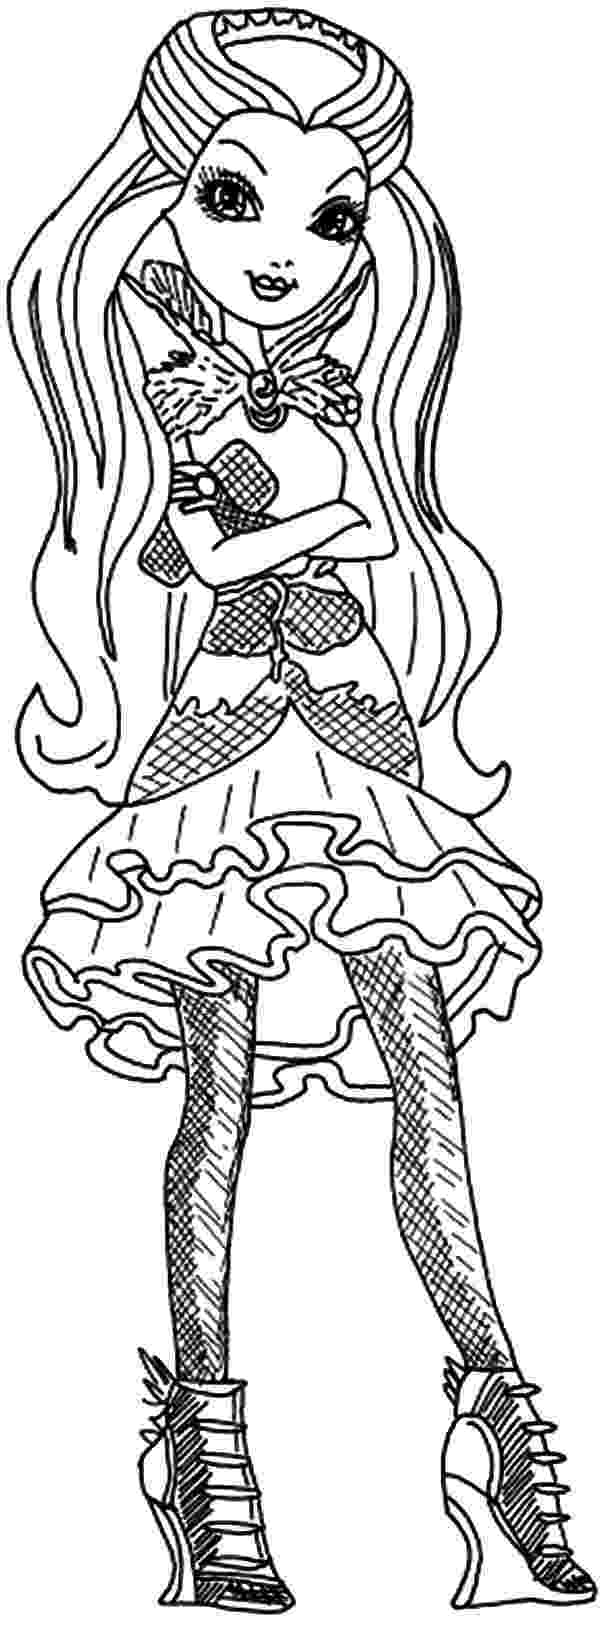 ever after high coloring book top 10 ever after high coloring pages ever book coloring high after 